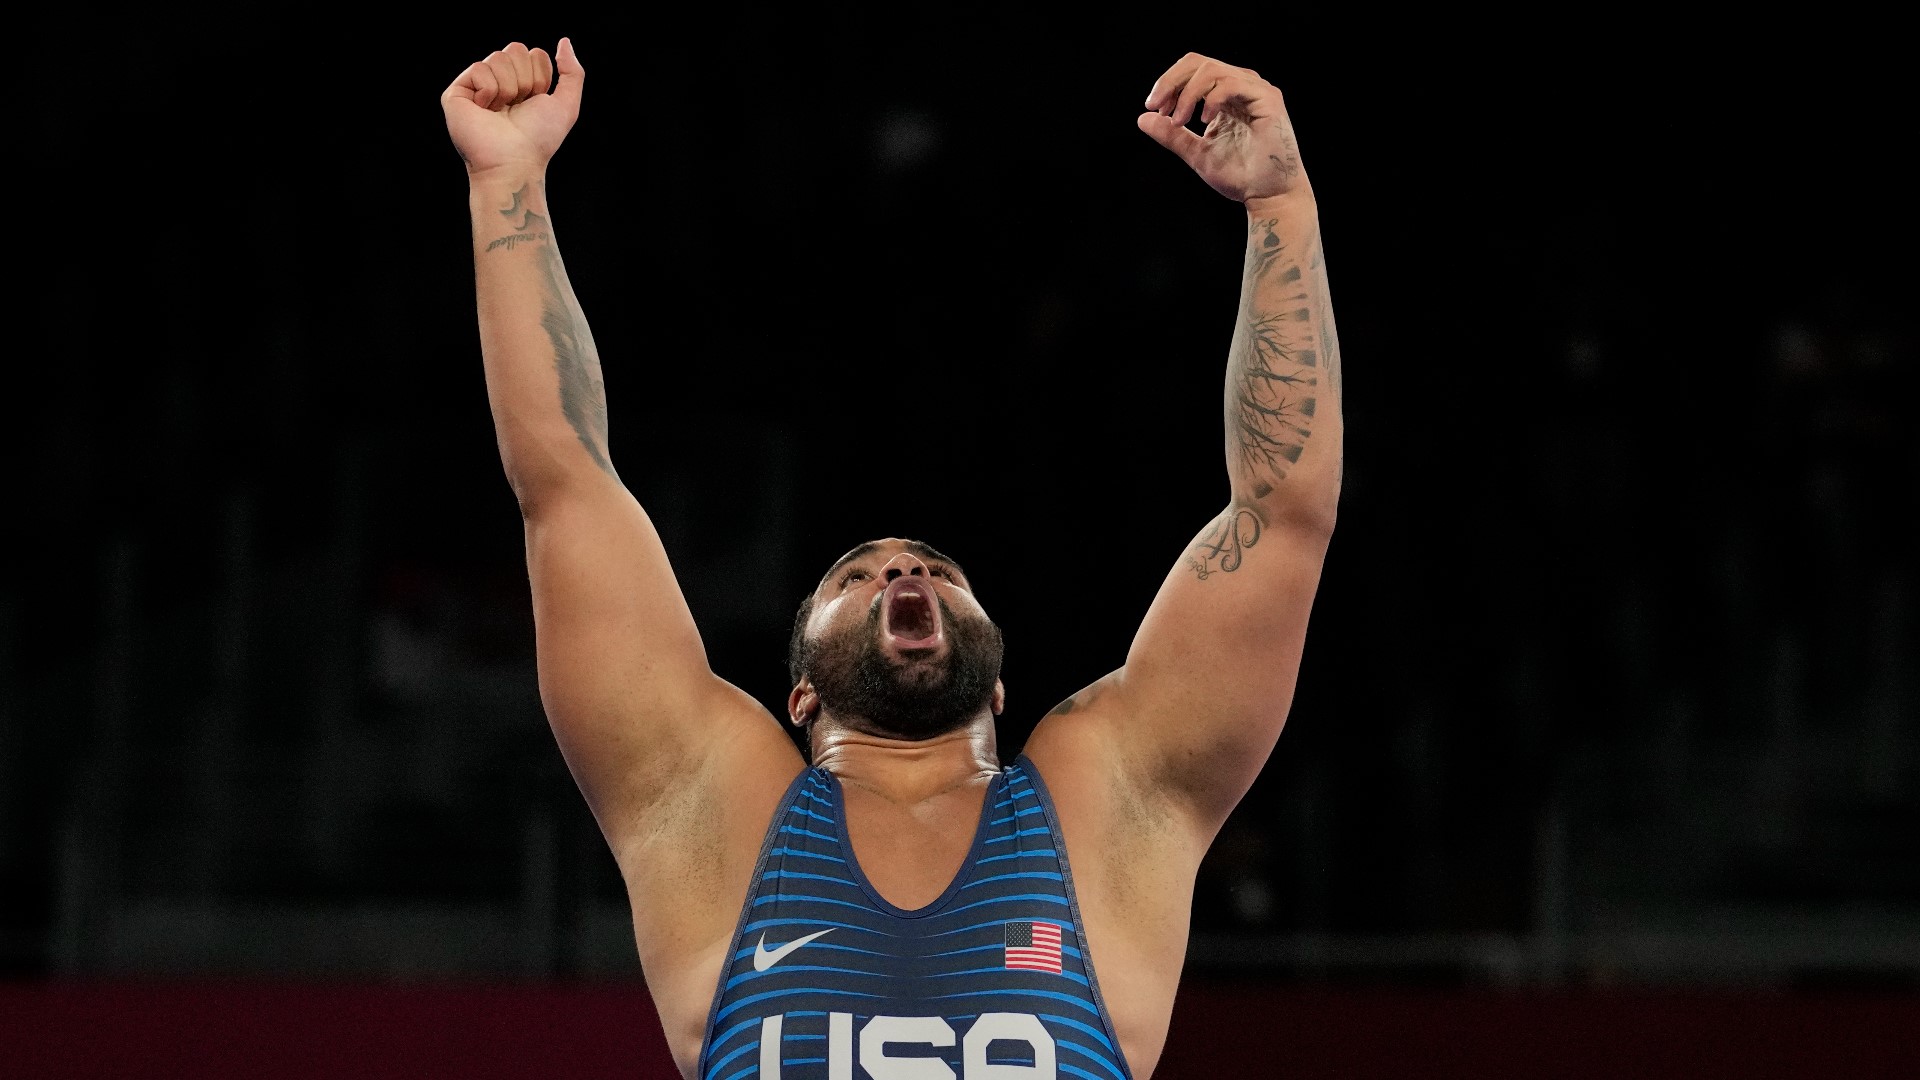 The Gopher looked good heading into the men's 125kg freestyle match, and at the last second he was able to secure a win.